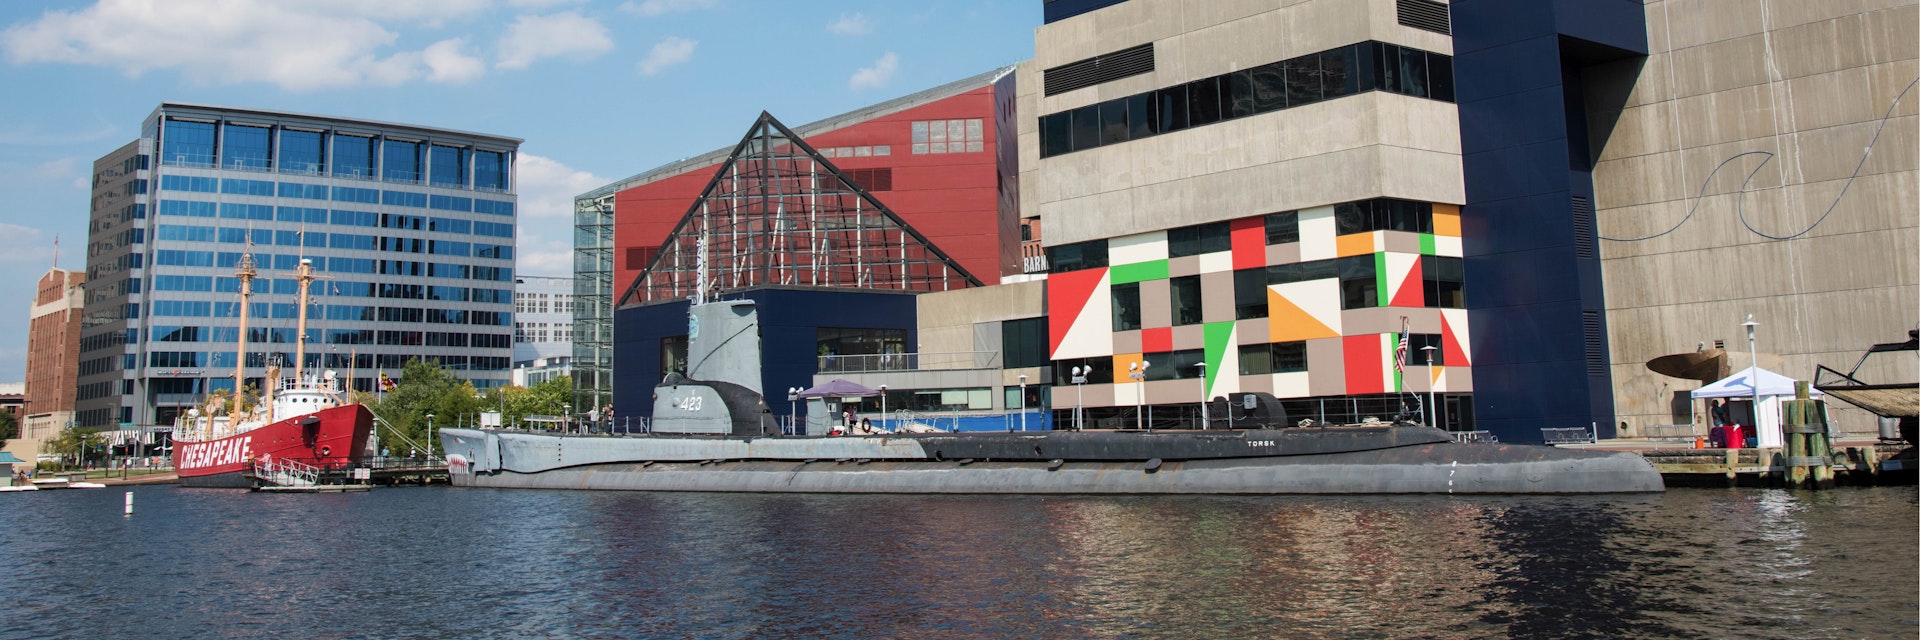 Historic ships in front of the National Aquarium, Baltimore, Maryland. (Photo By: Education Images/UIG via Getty Images)